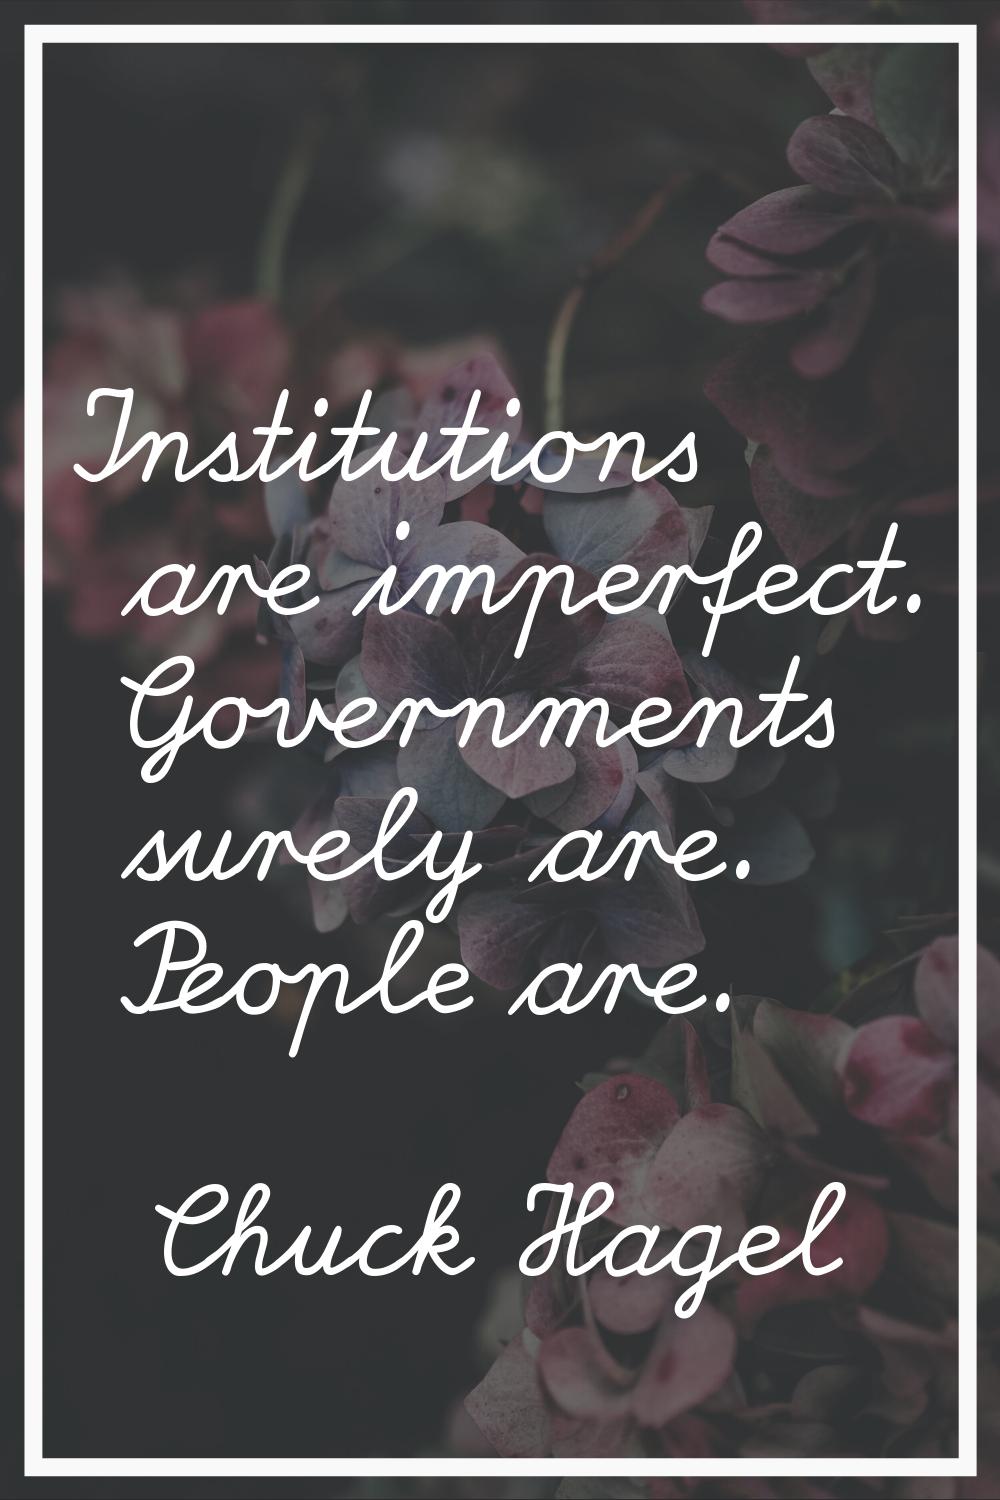 Institutions are imperfect. Governments surely are. People are.